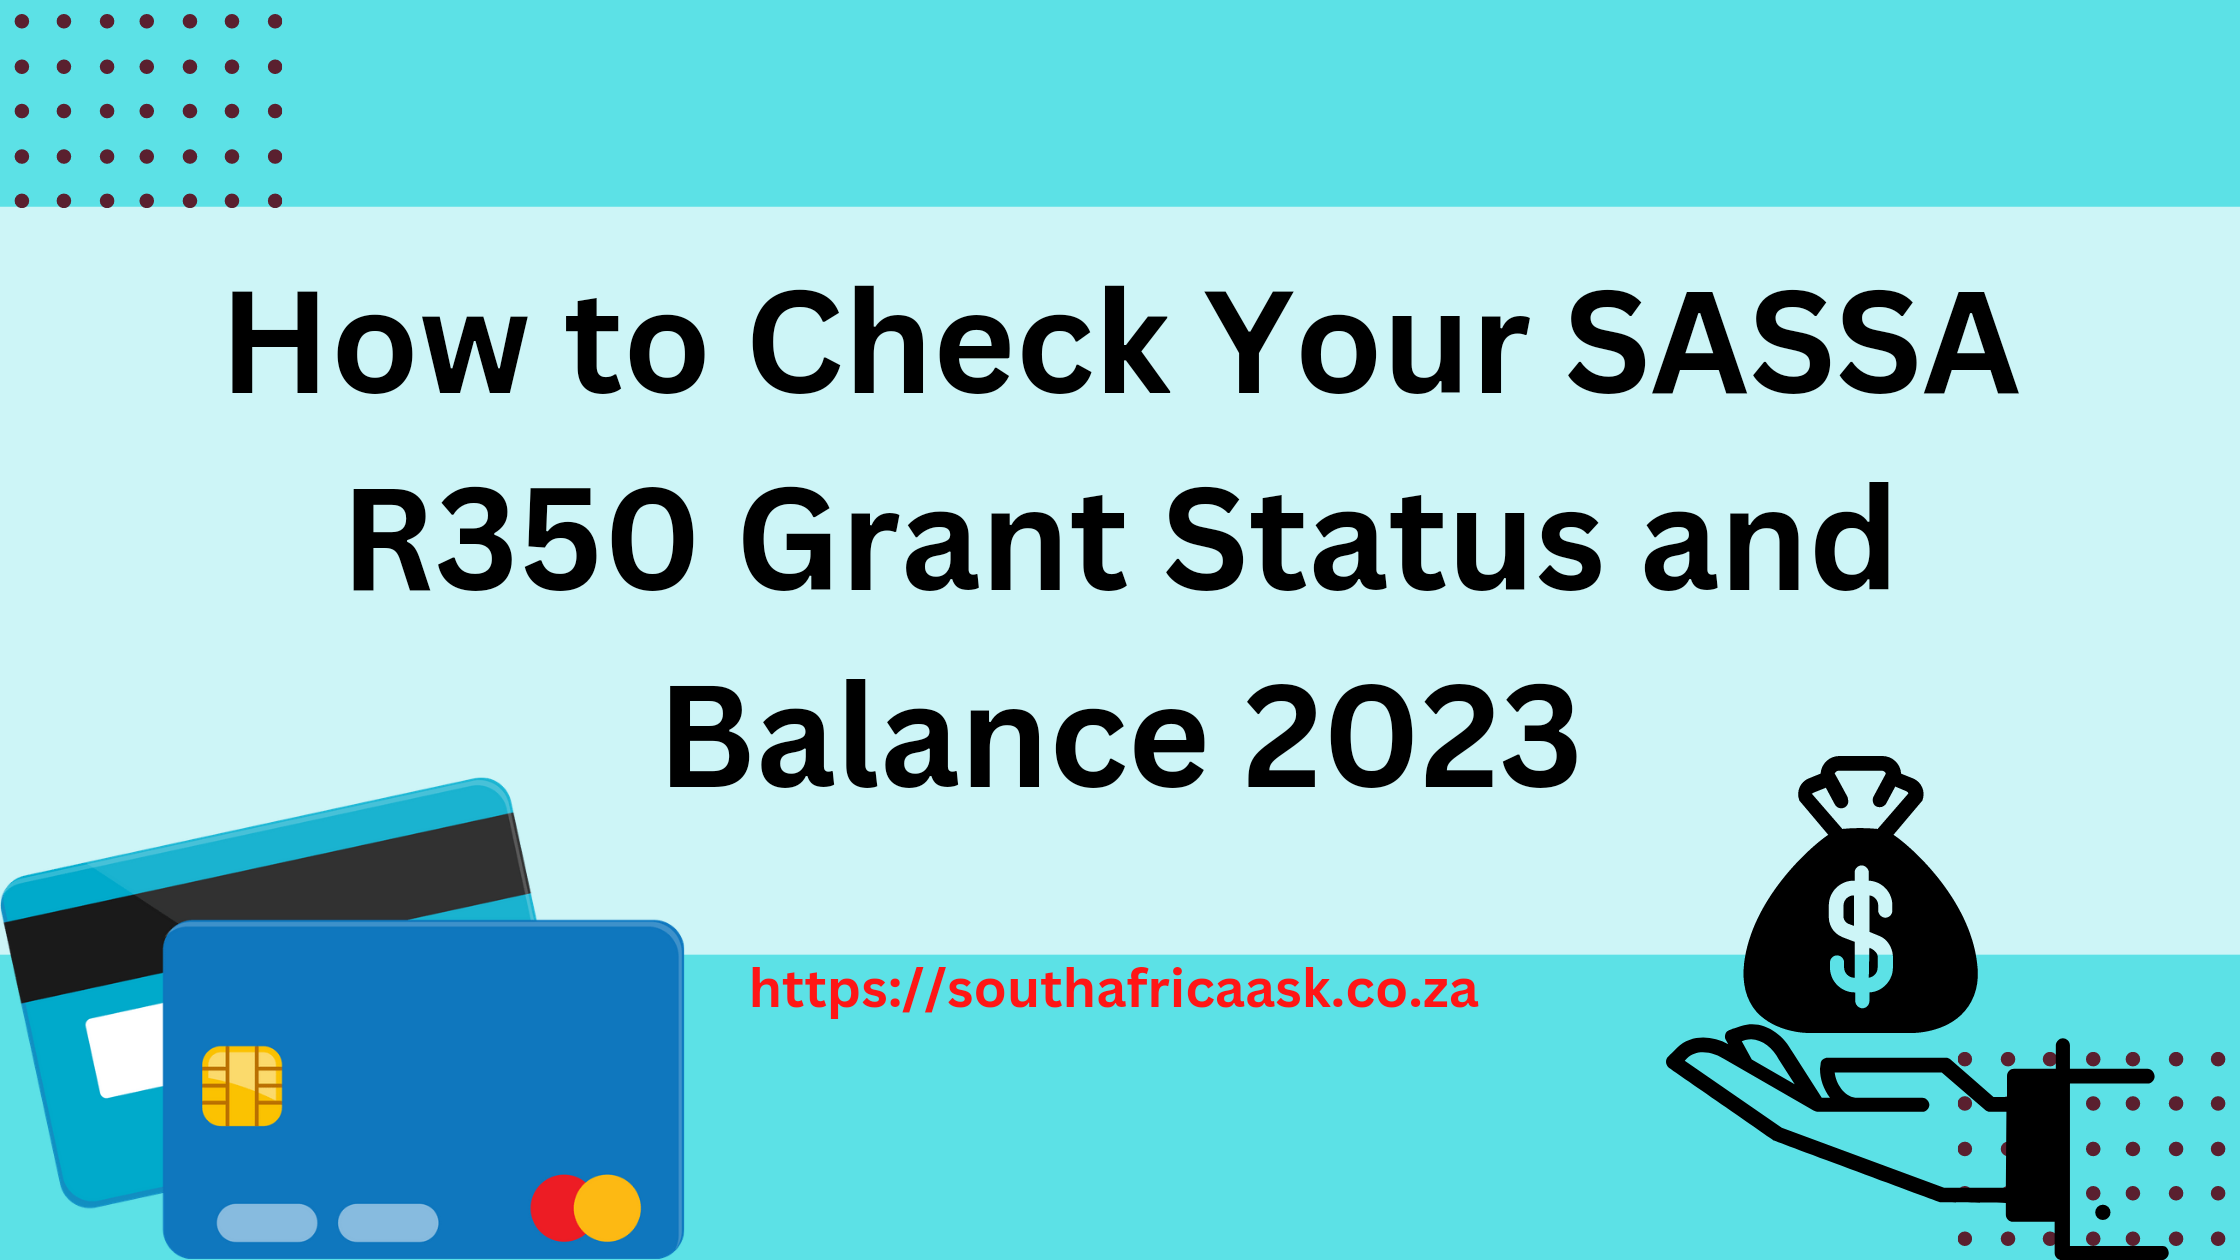 How to Check Your SASSA R350 Grant Status and Balance 2023